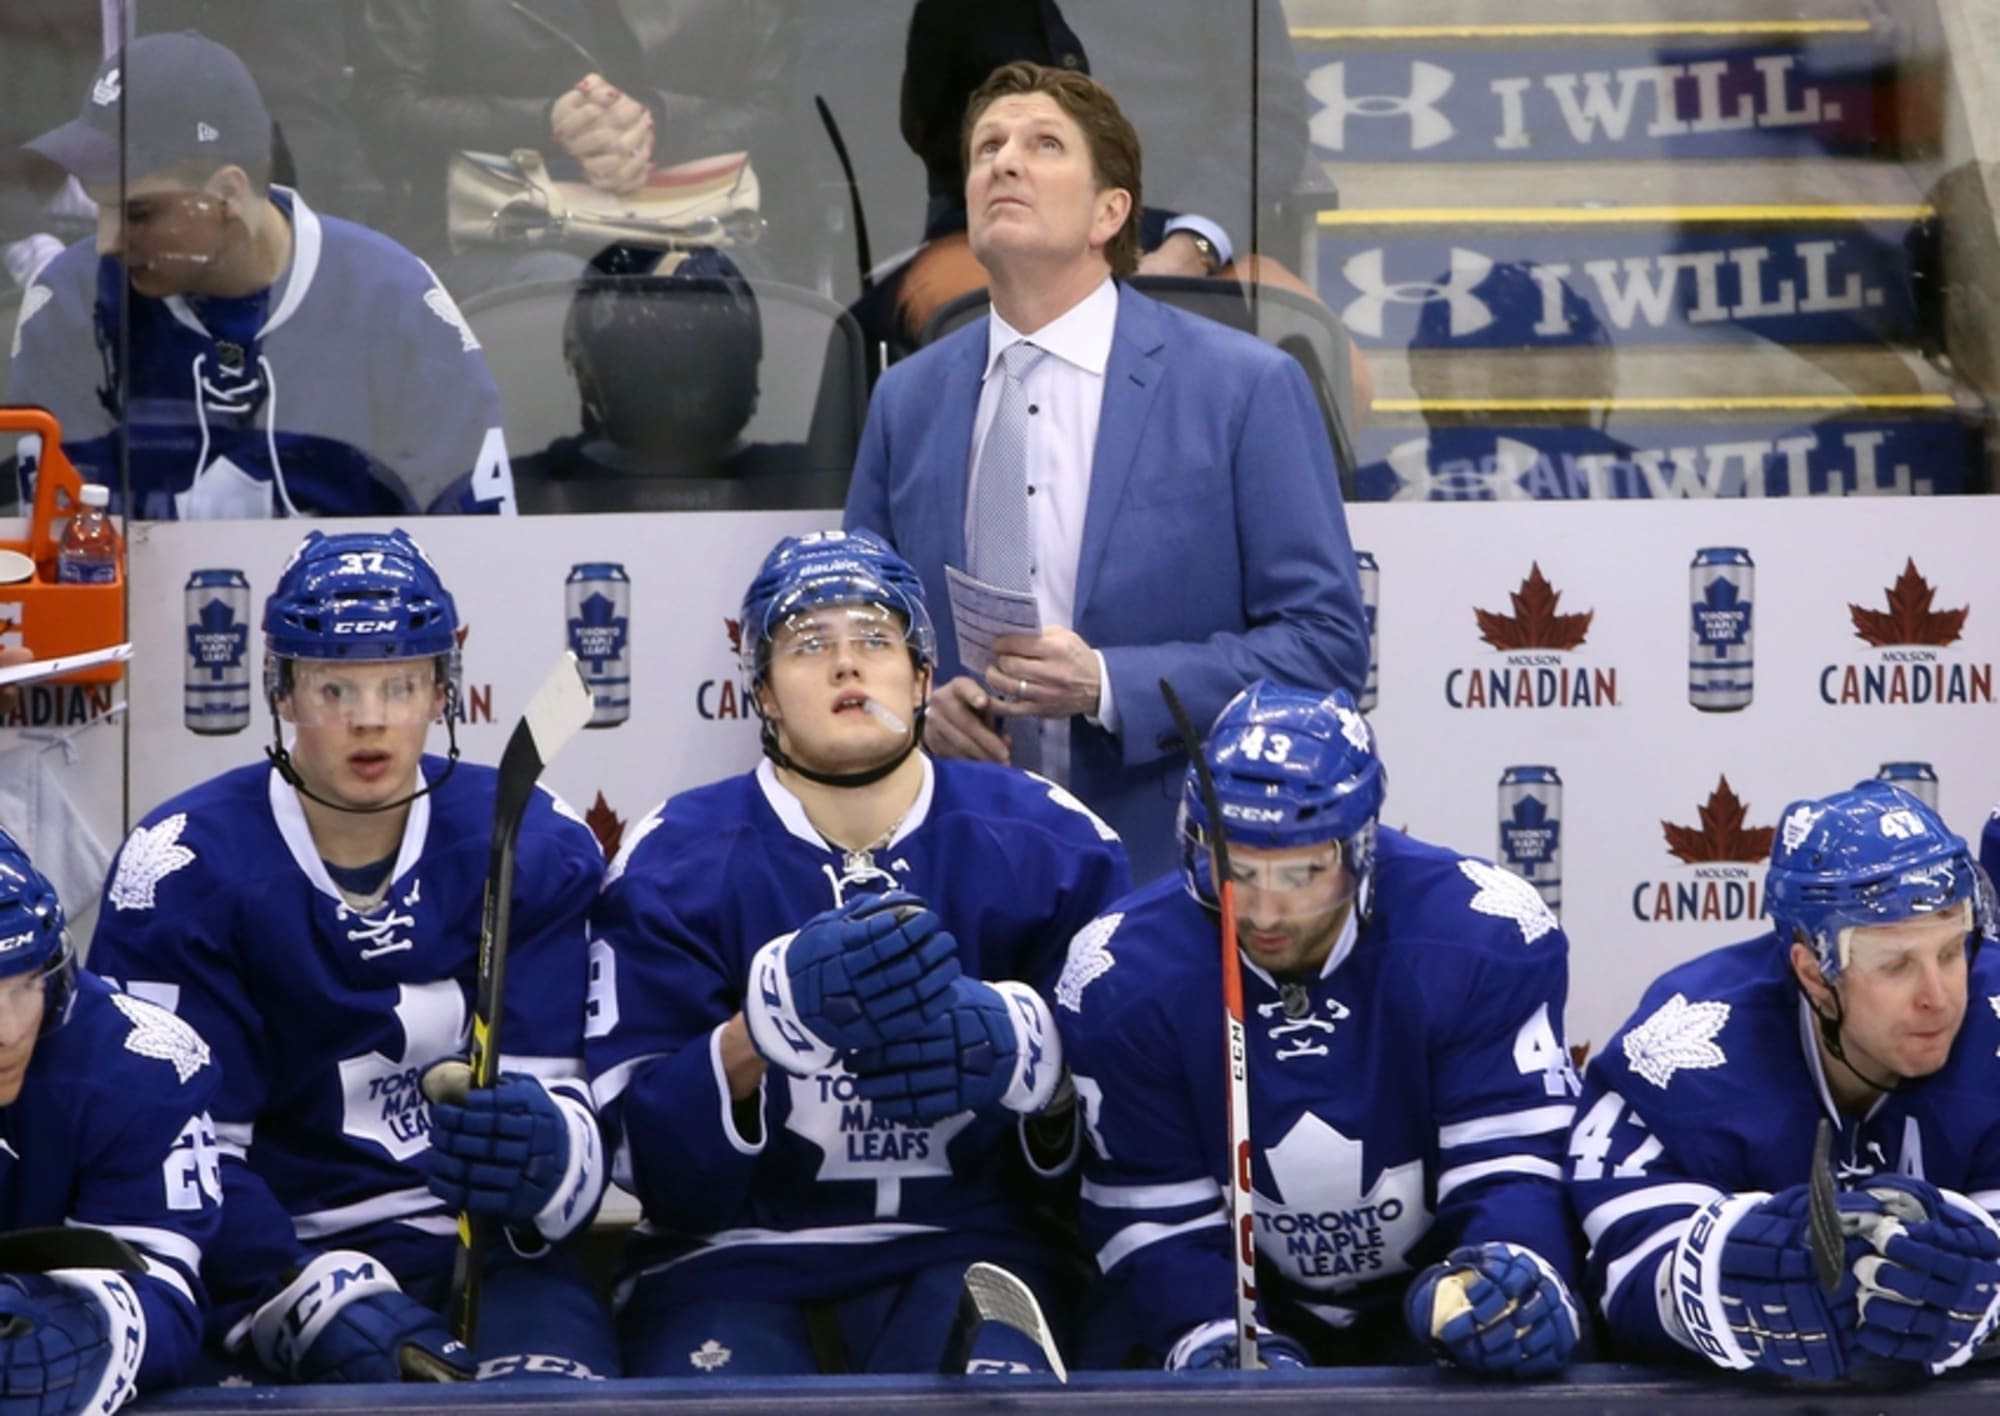 The Hilarious Irony of This Year's Toronto Maple Leafs